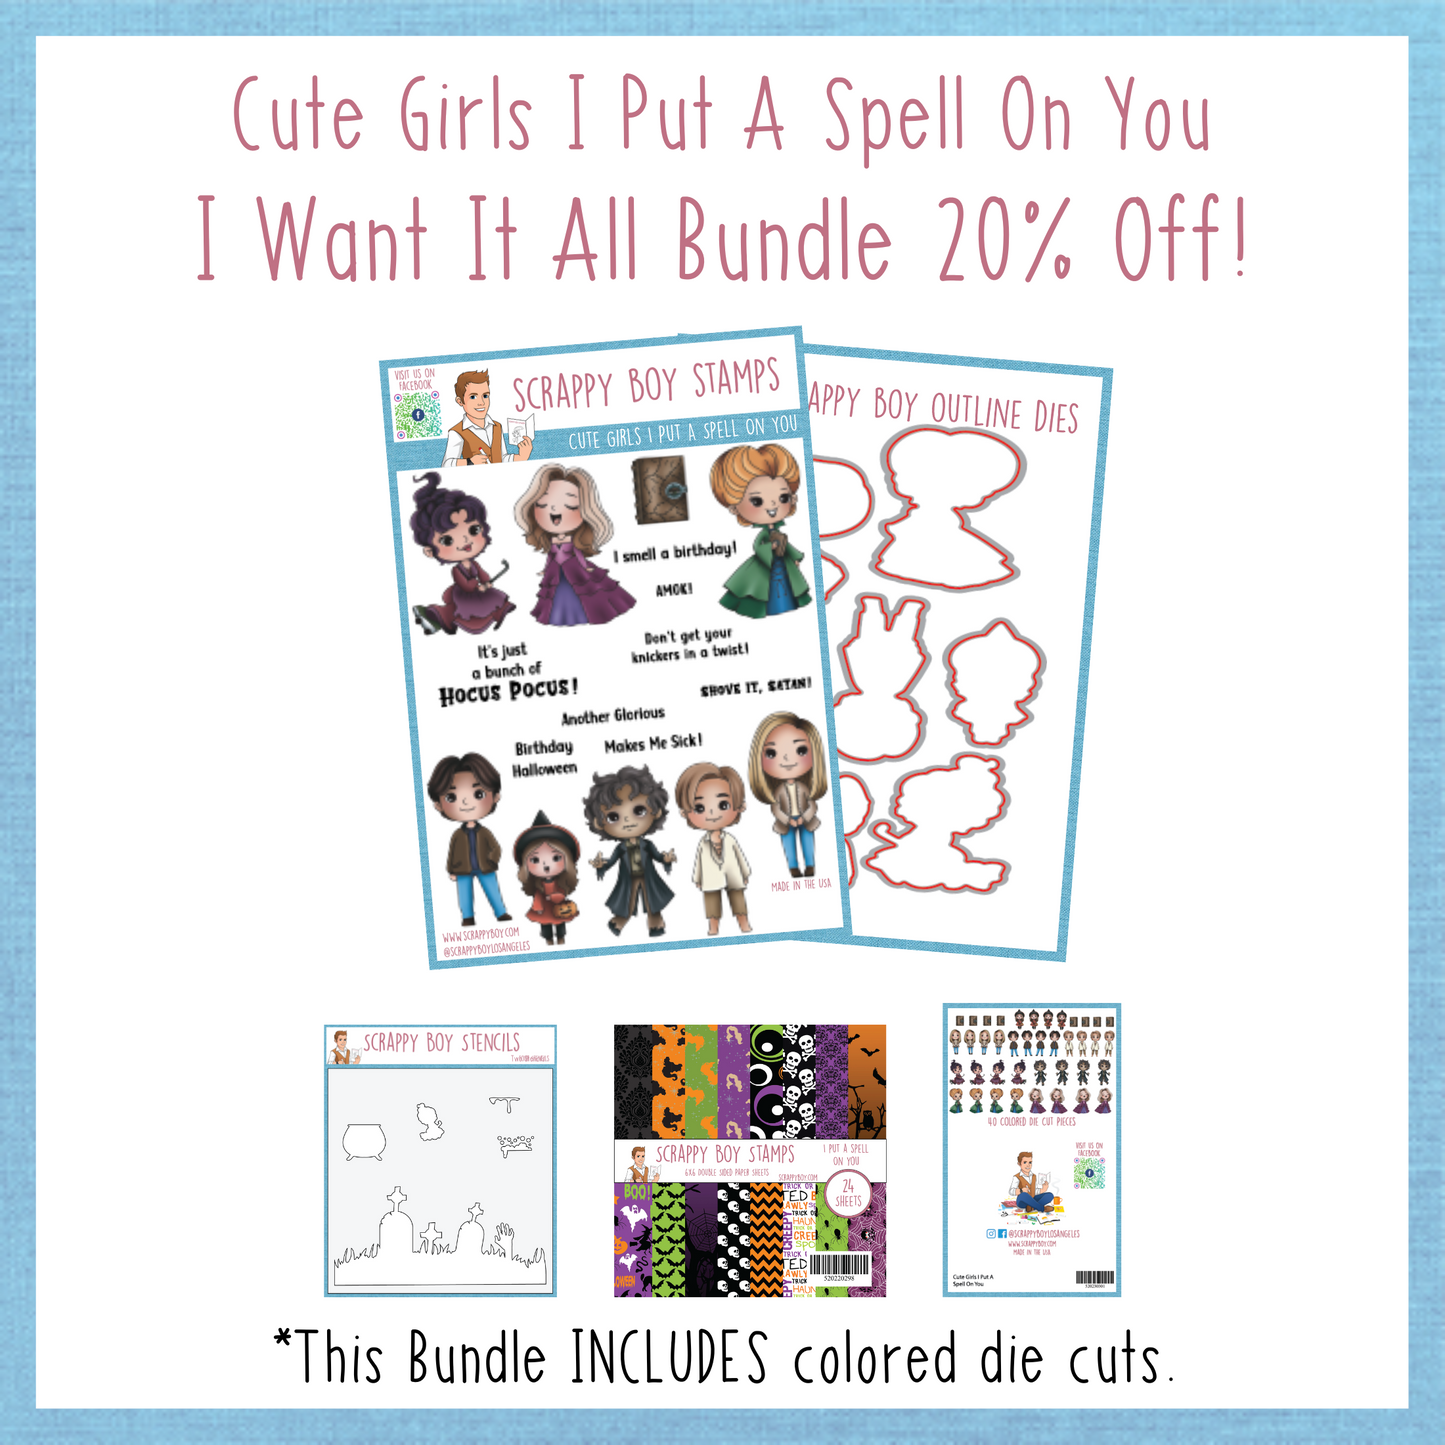 I Want It All Bundle - Cute Girls I Put A Spell On You Release Scrappy Boy Stamps